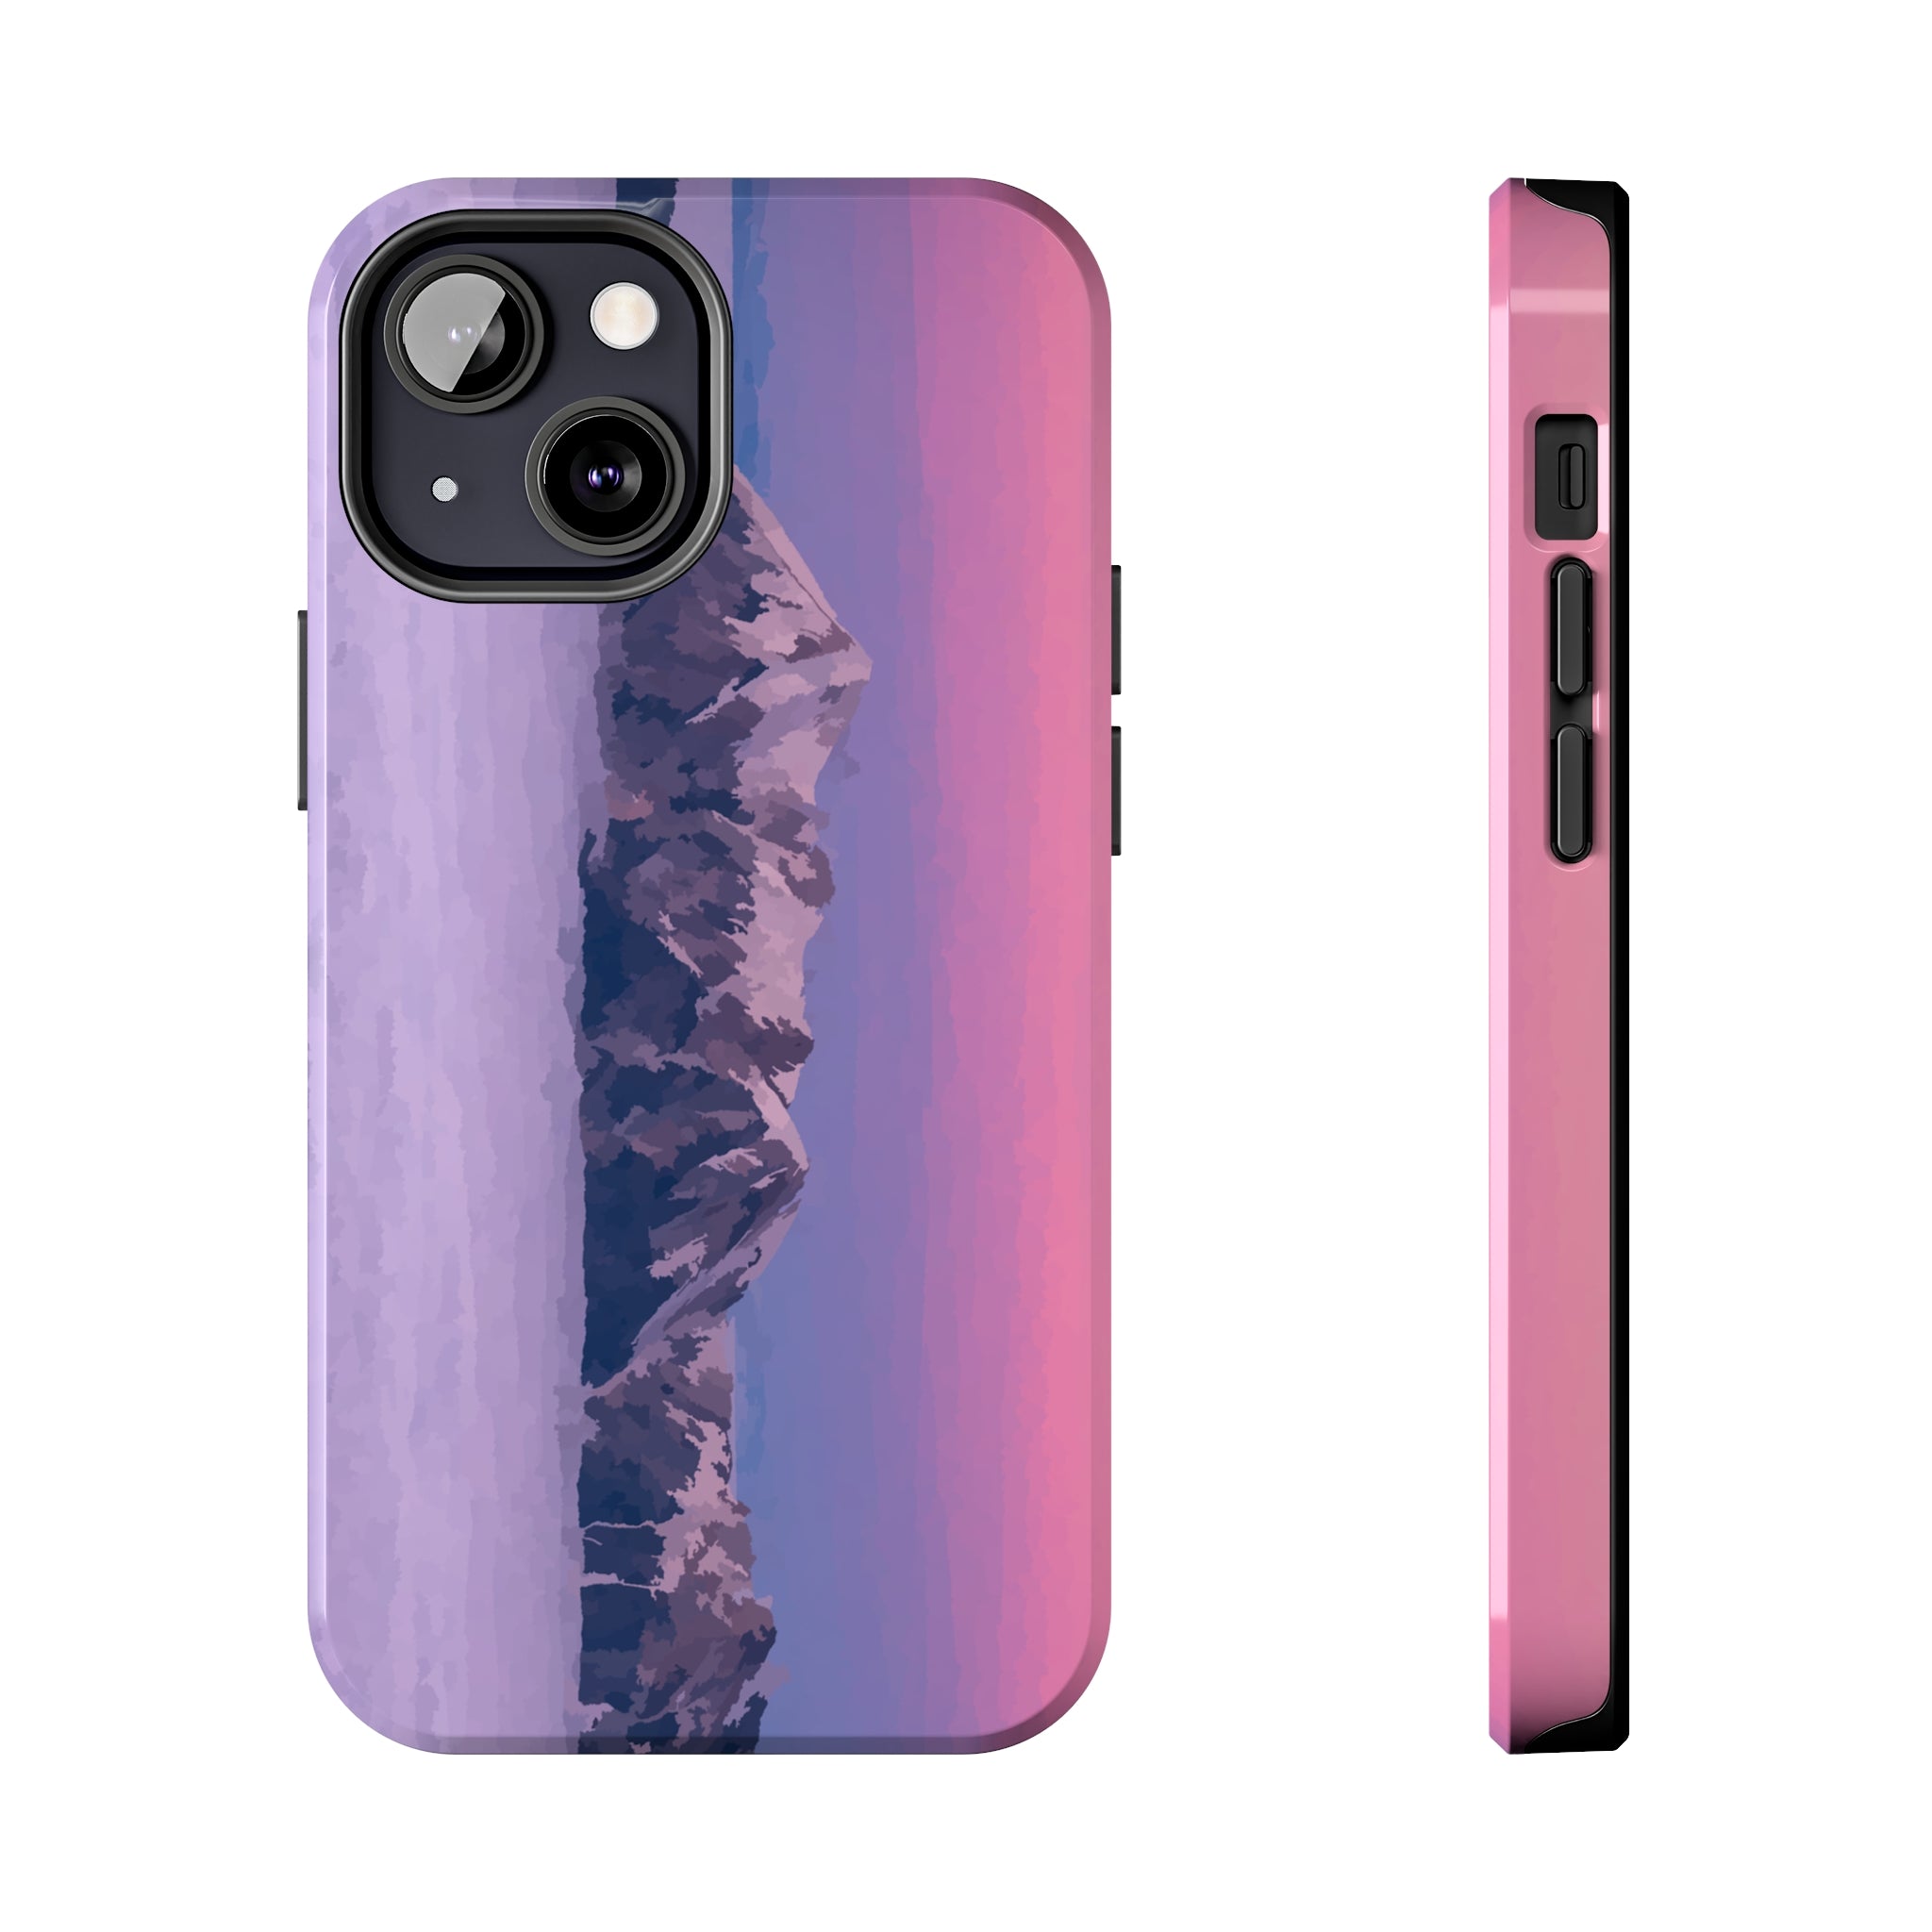 Main image of Sea Of Clouds iPhone Case